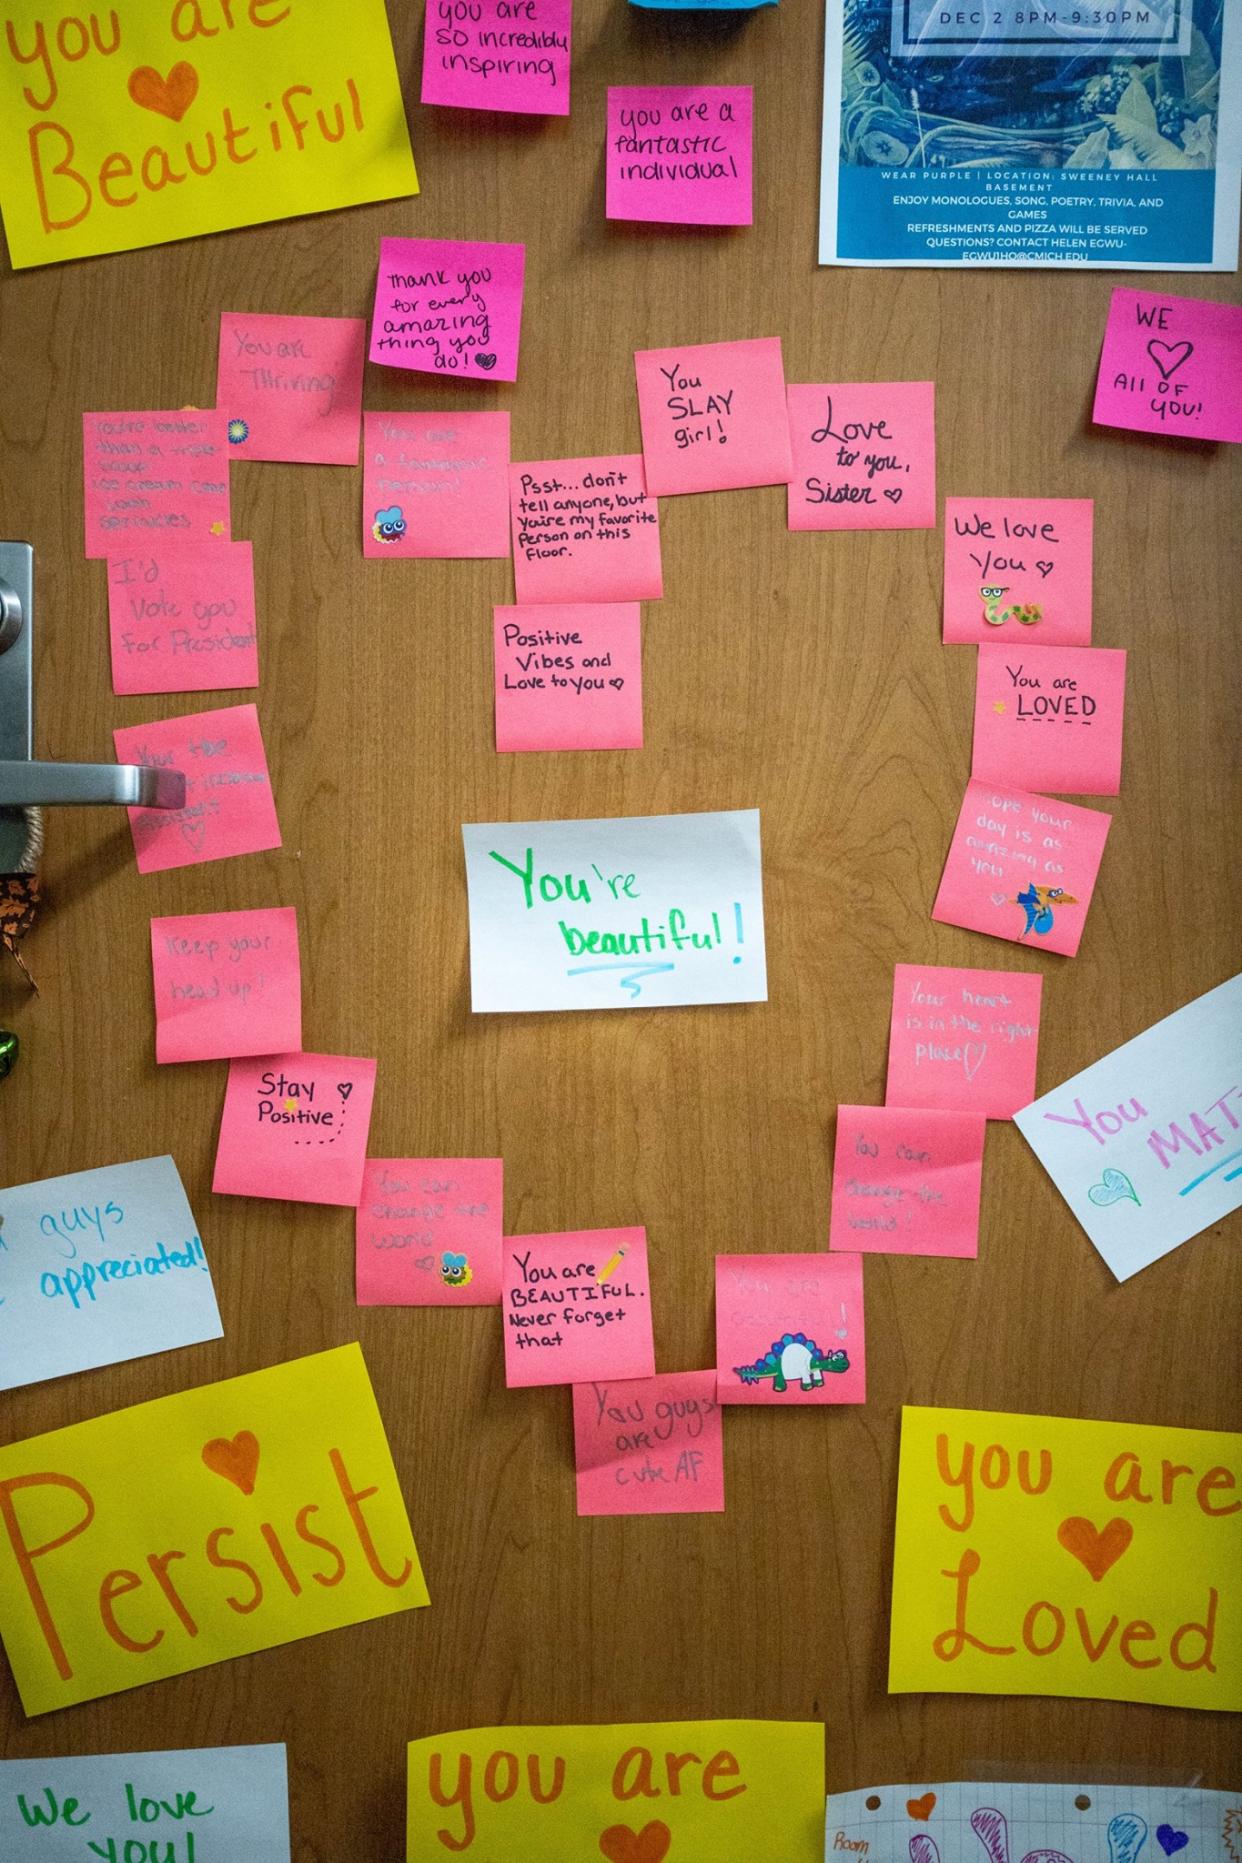 Students at Central Michigan University decorated a classmate's door with kind notes after someone left a hate note on her door